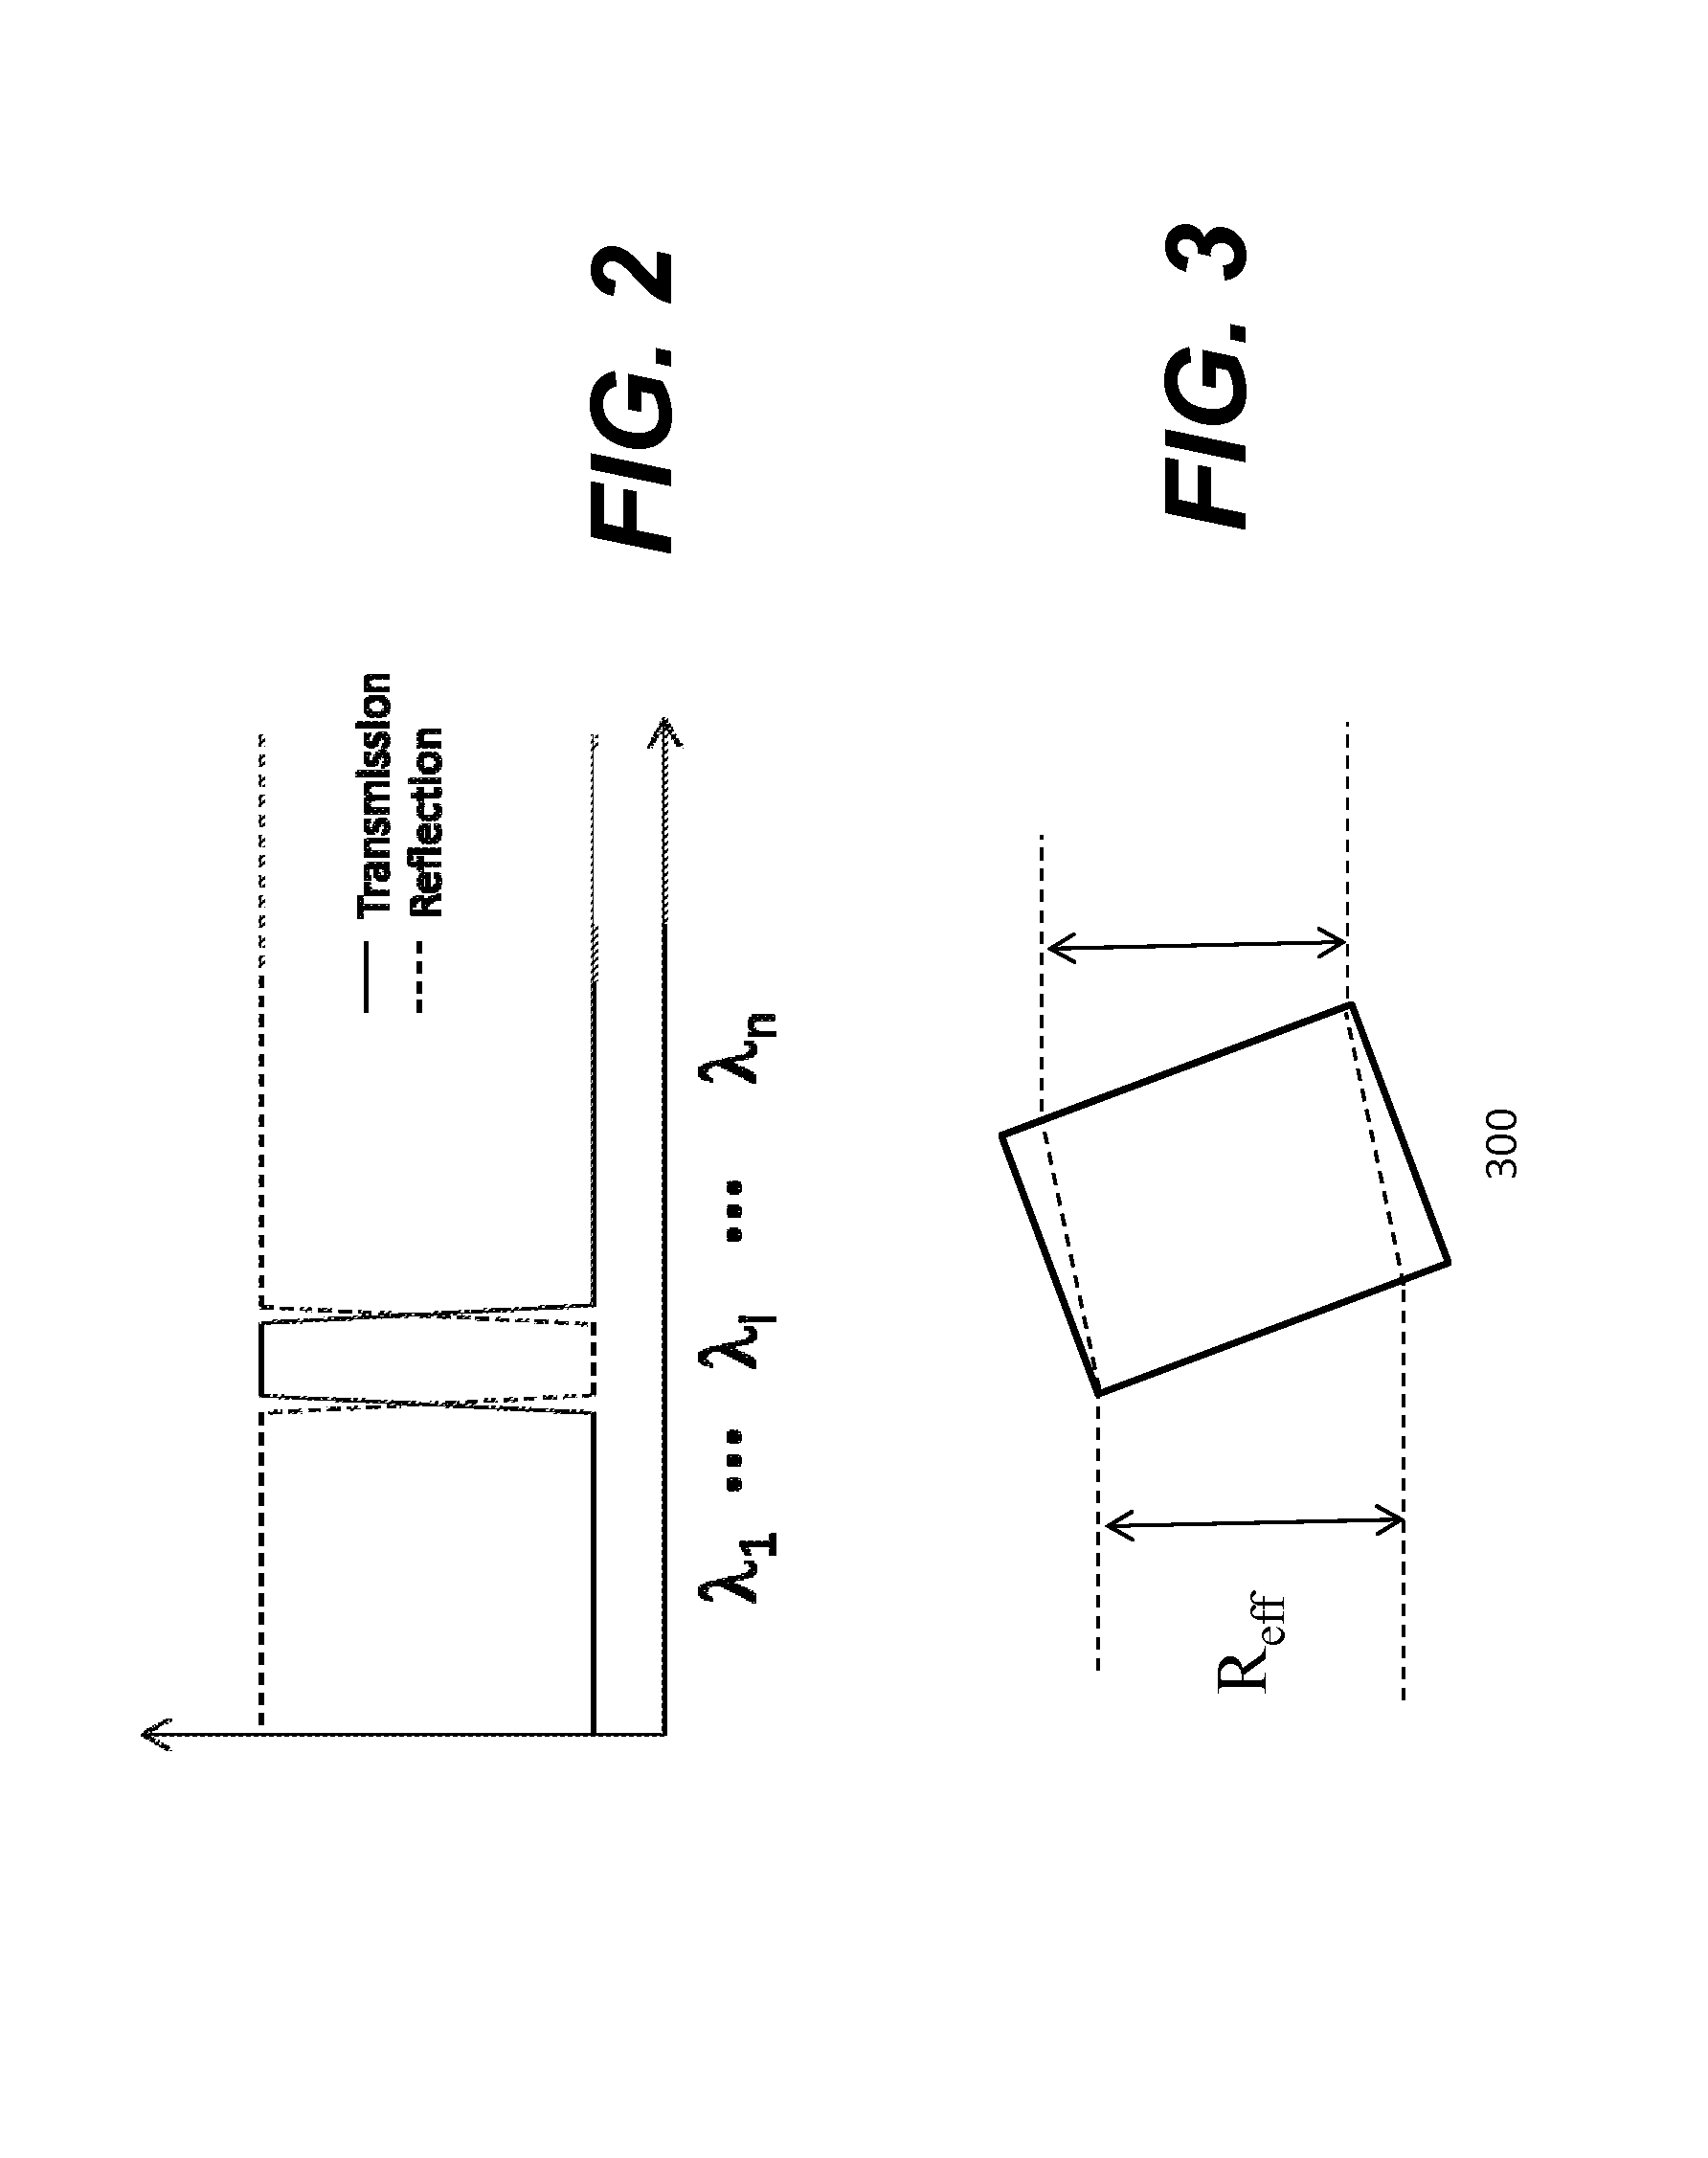 WDM Mux/DeMux employing filters shaped for maximum use thereof